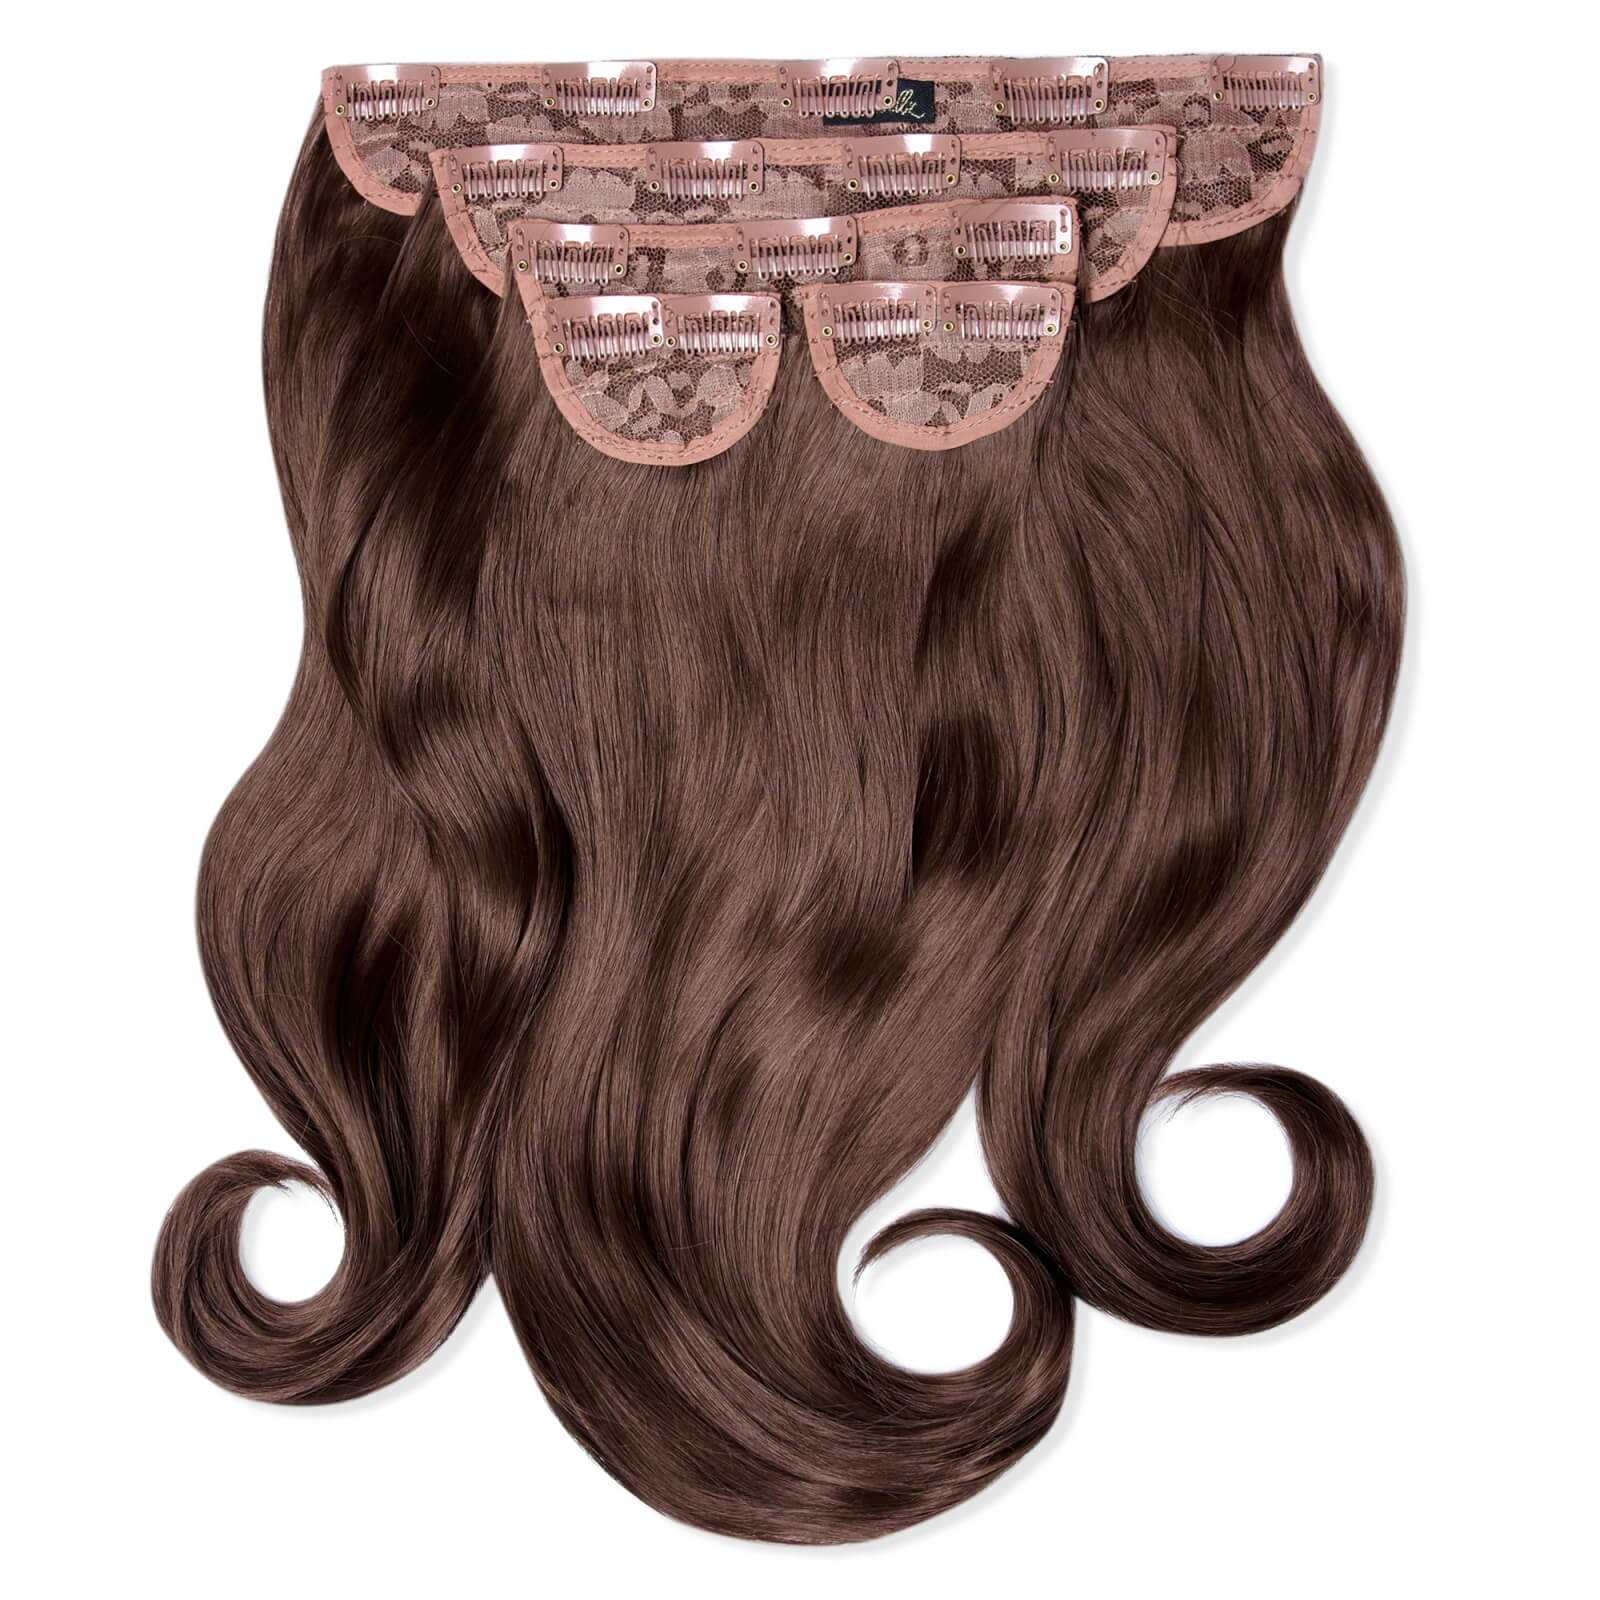 Image of LullaBellz Super Thick 16 5 Piece Blow Dry Wavy Clip In Extensions (Various Shades) - Chestnut